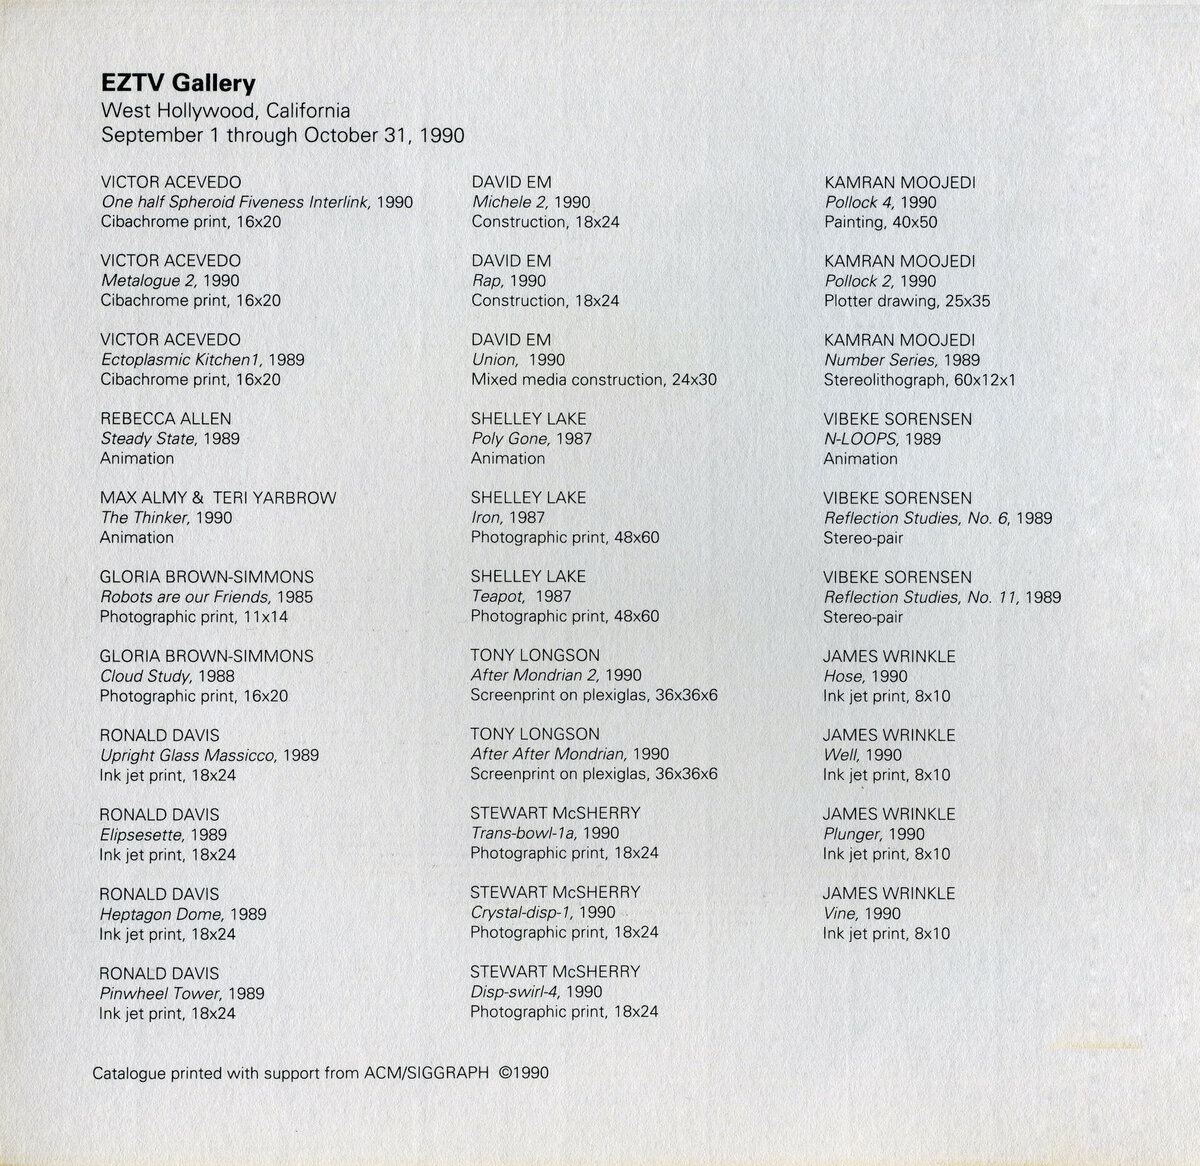 ART 1990 page 01 front cover inside - list of artists + works